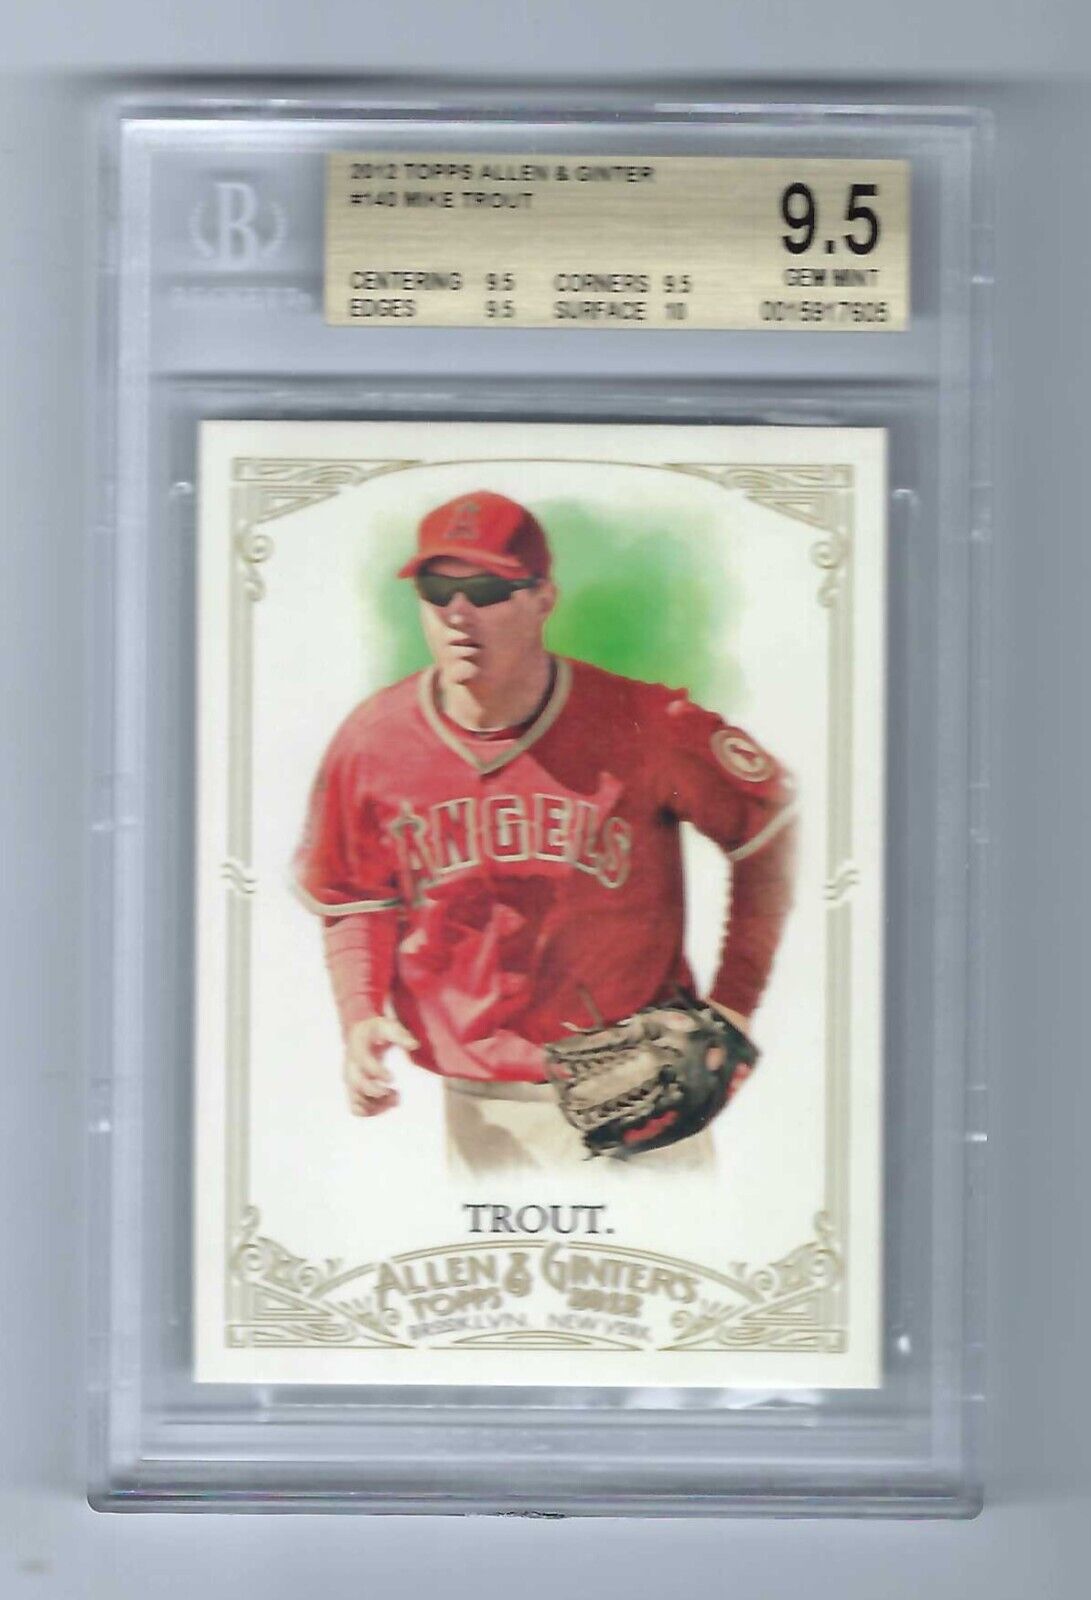 2012 Topps Allen & Ginter #140 Mike Trout Angels BGS 9.5 GEM MINT